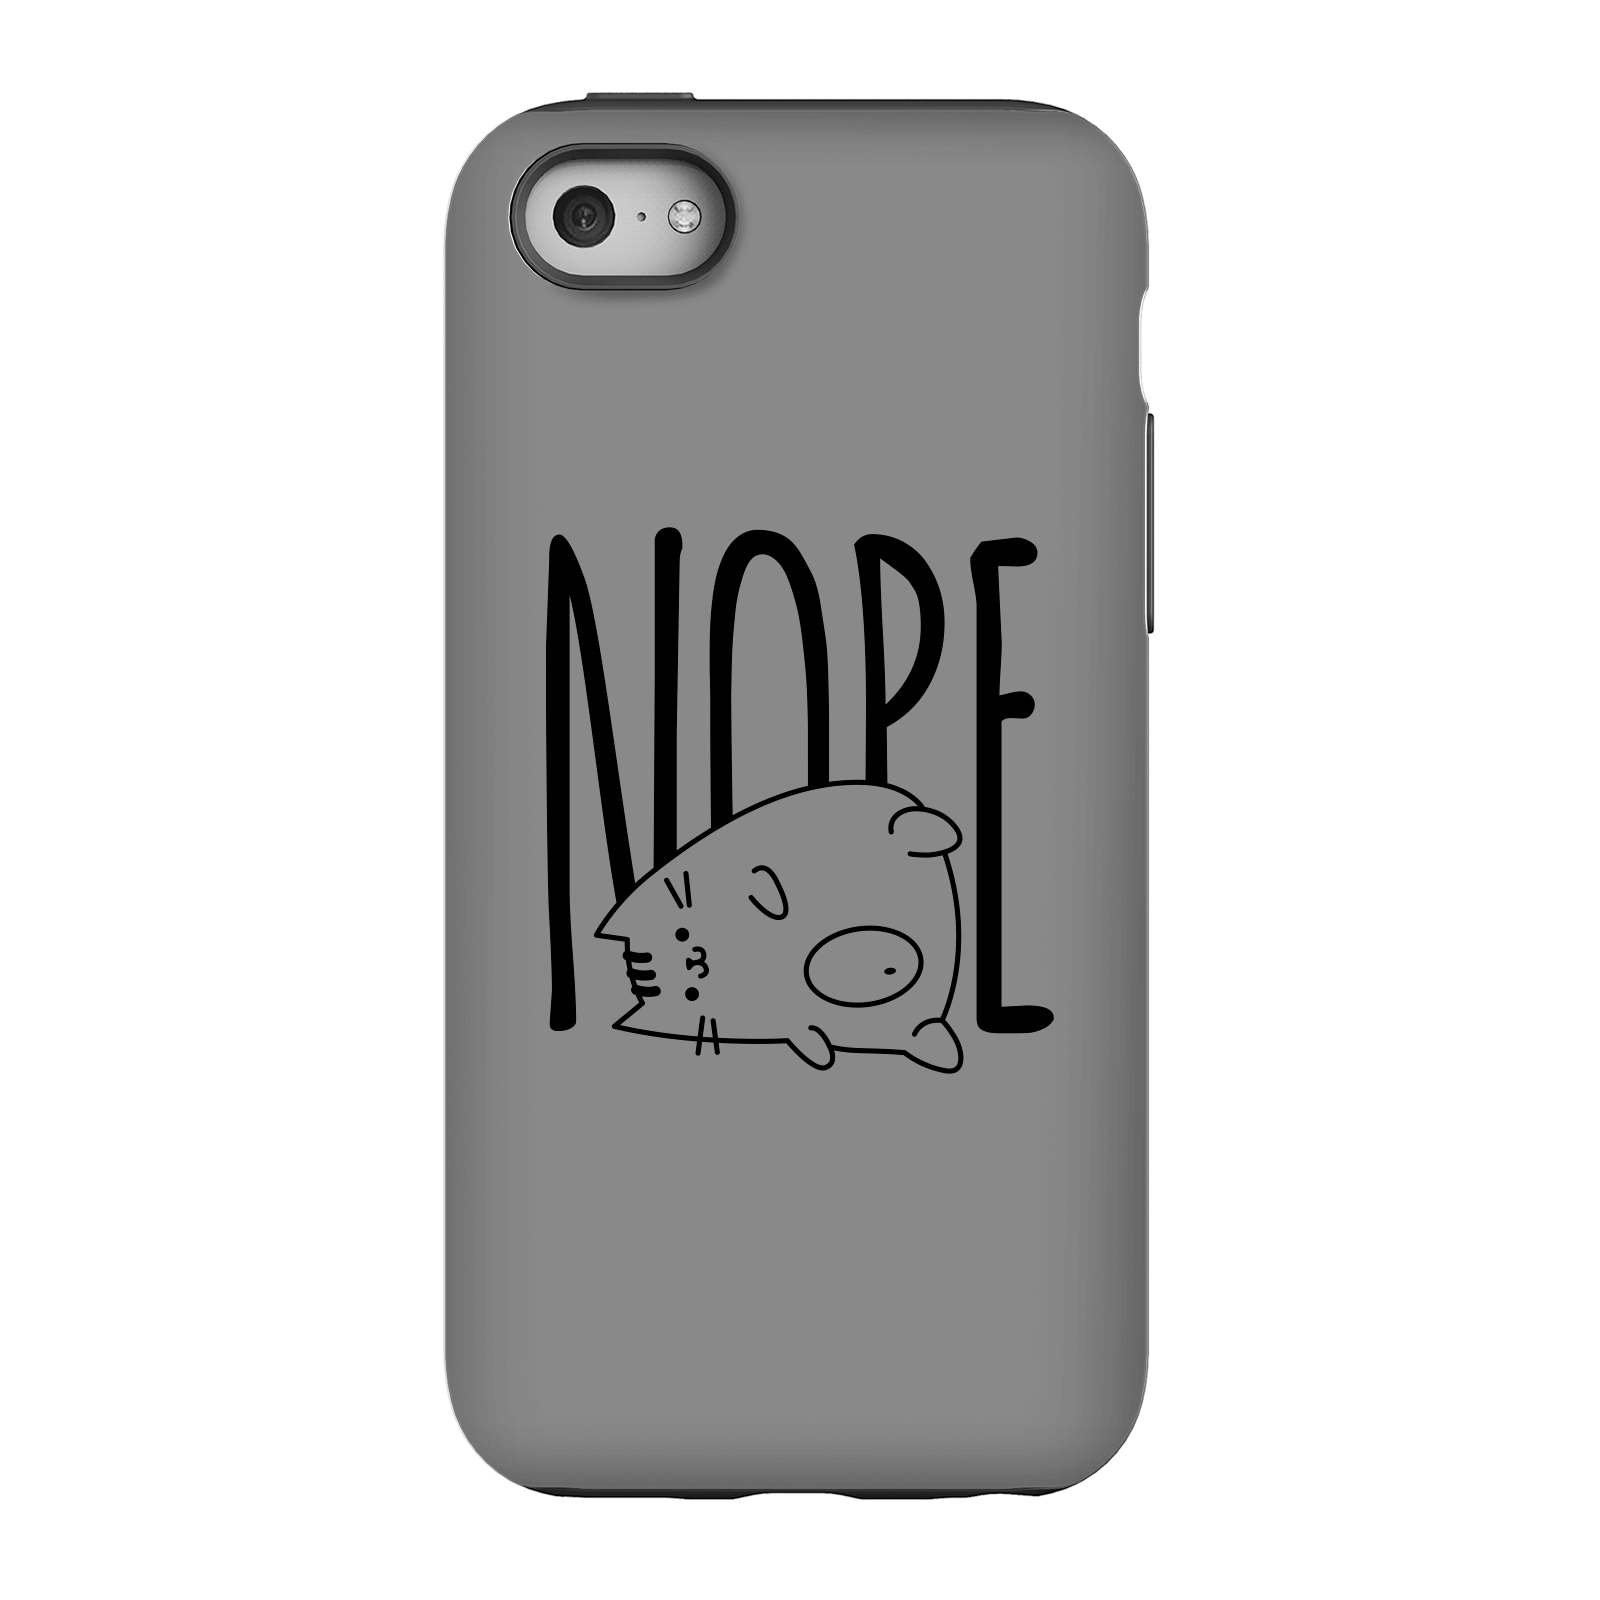 Nope Phone Case for iPhone and Android - iPhone 5C - Tough Case - Gloss